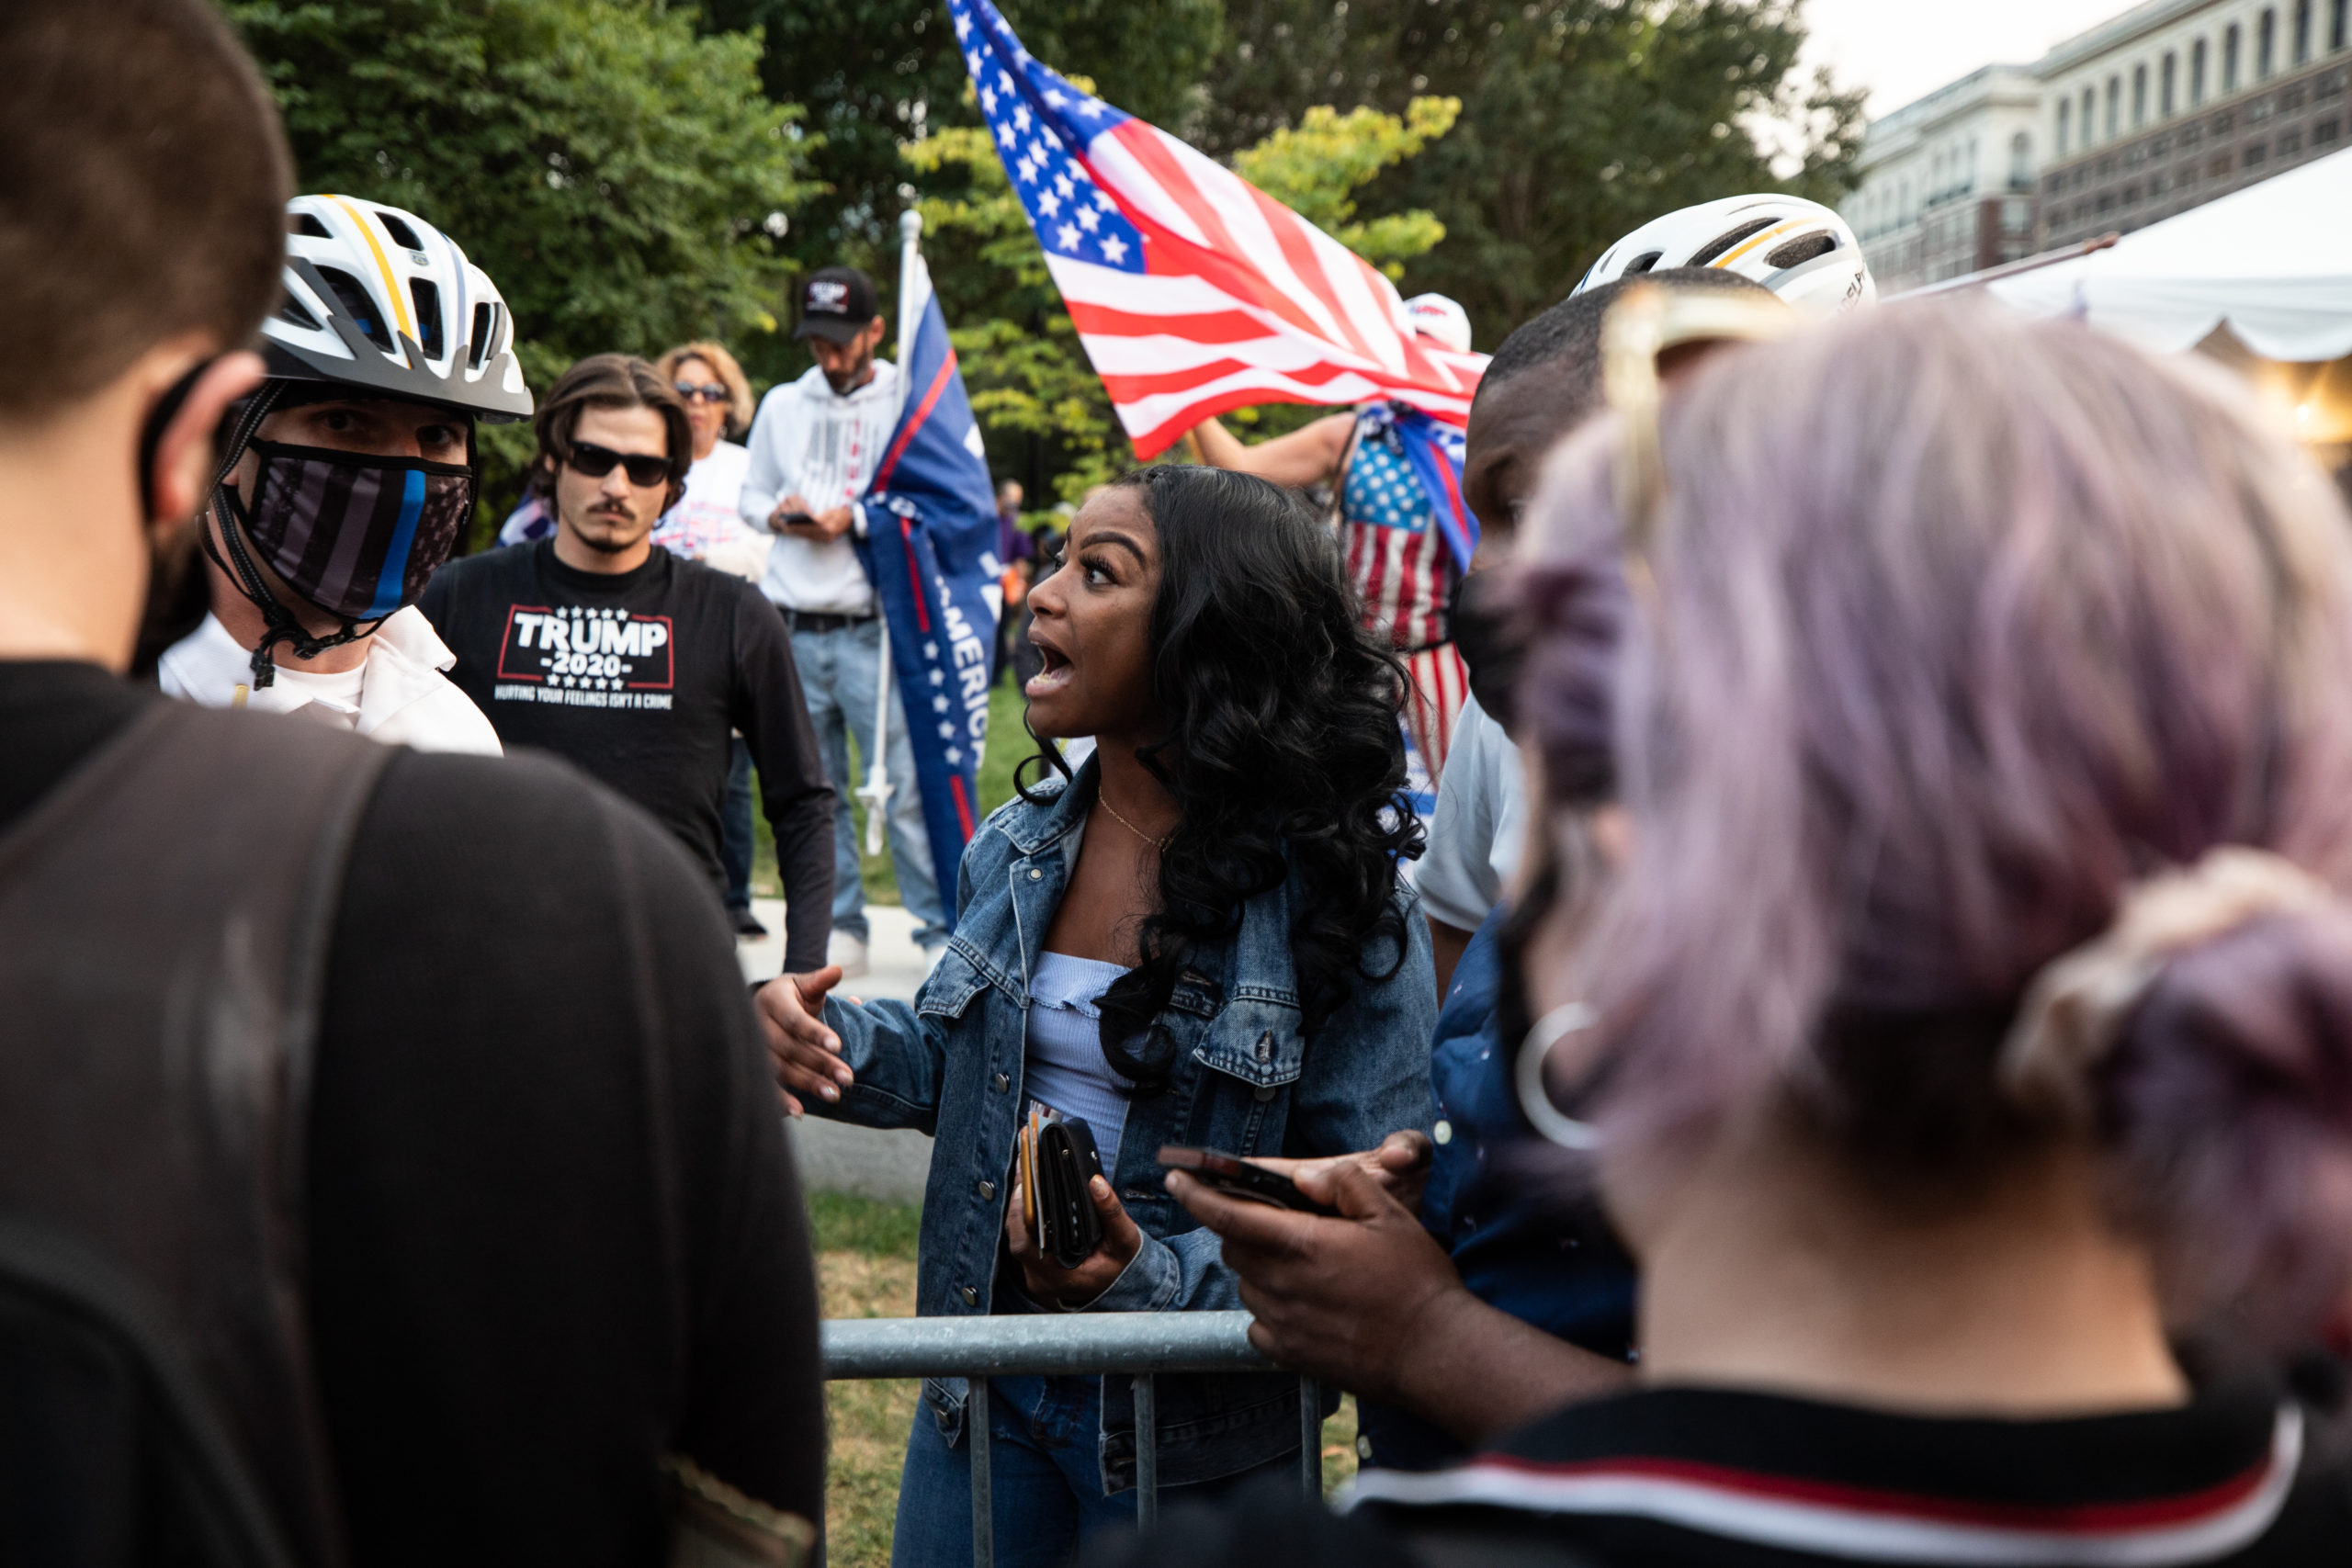 A Trump supporter tells an officer that protesters stole her black "Keep America Great" hat off of her head in Philadelphia, Pennsylvania on Sept. 15, 2020. (Photo: Kaylee Greenlee / DCNF)